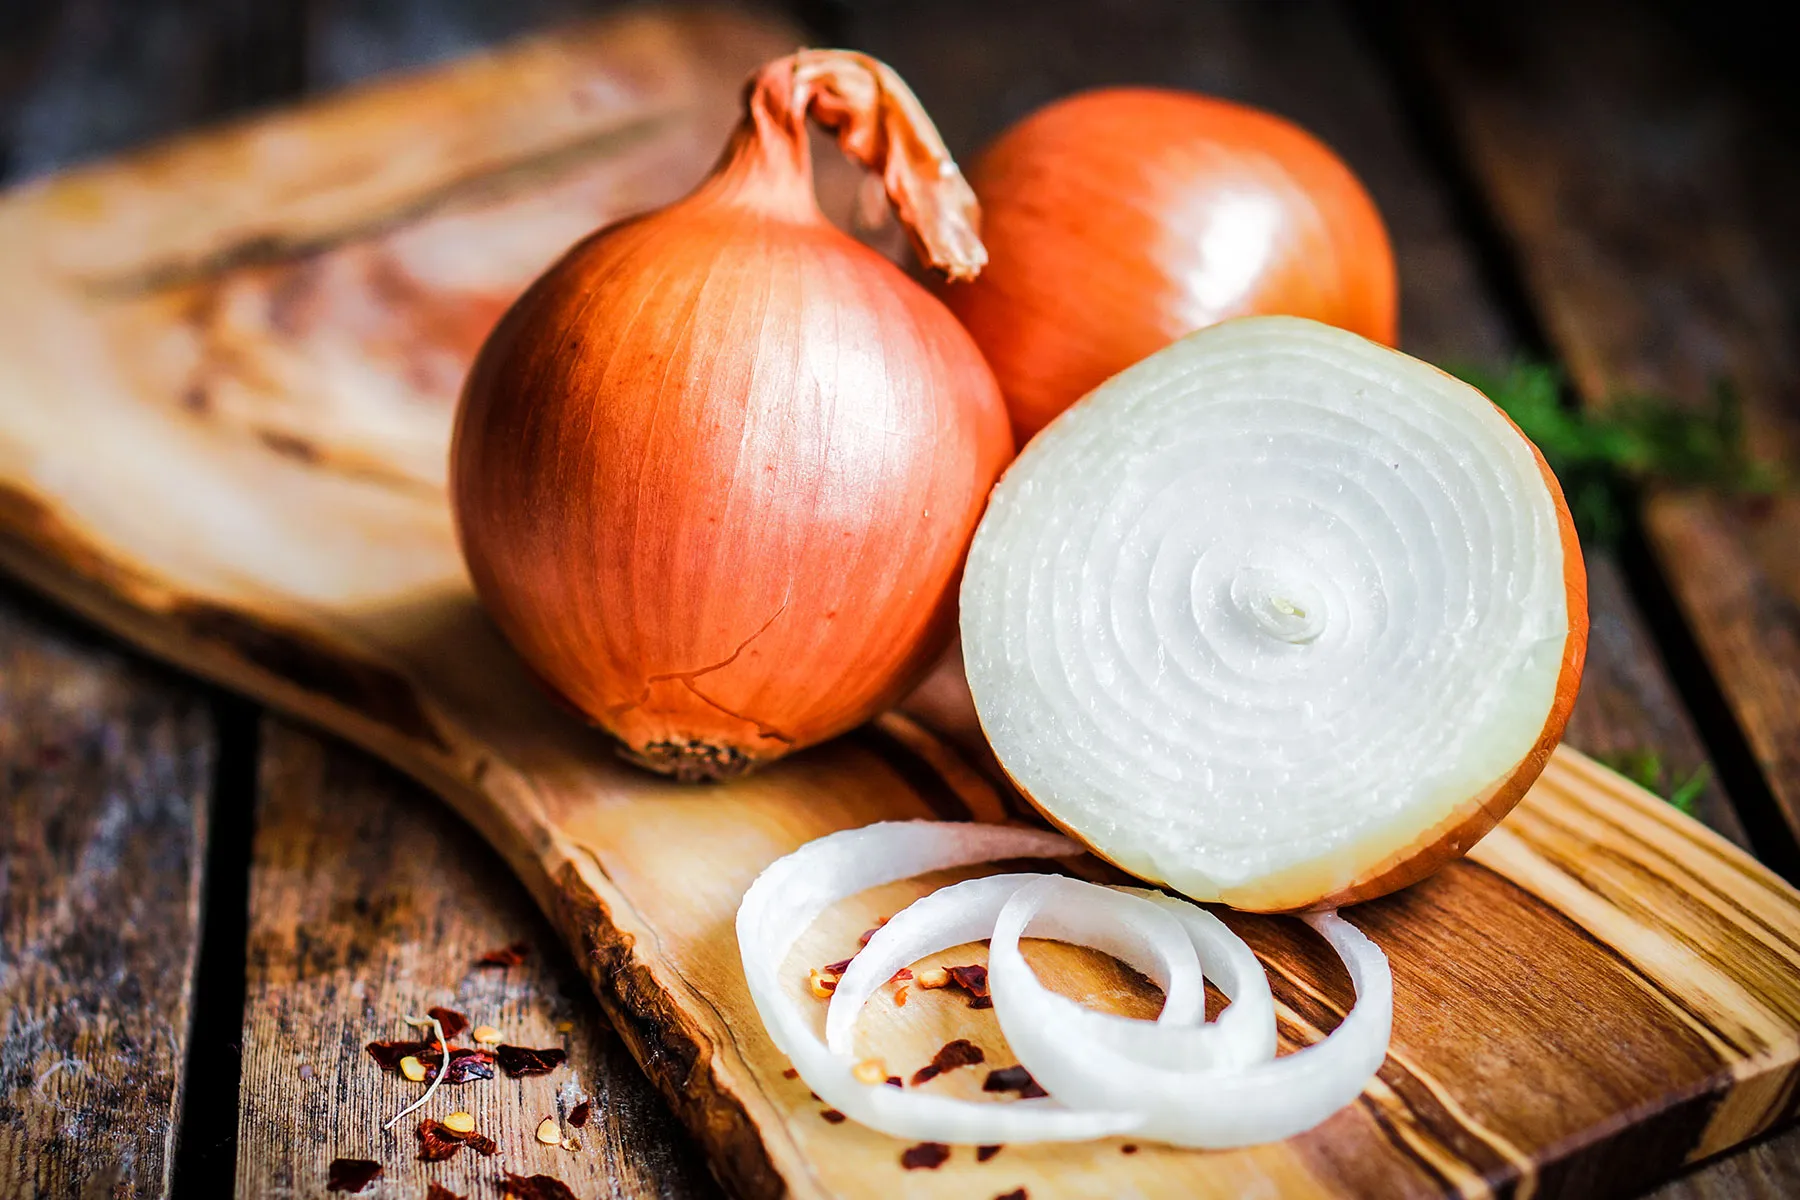 CDC: Whole Onions Identified as Source of Ongoing Salmonella Outbreak